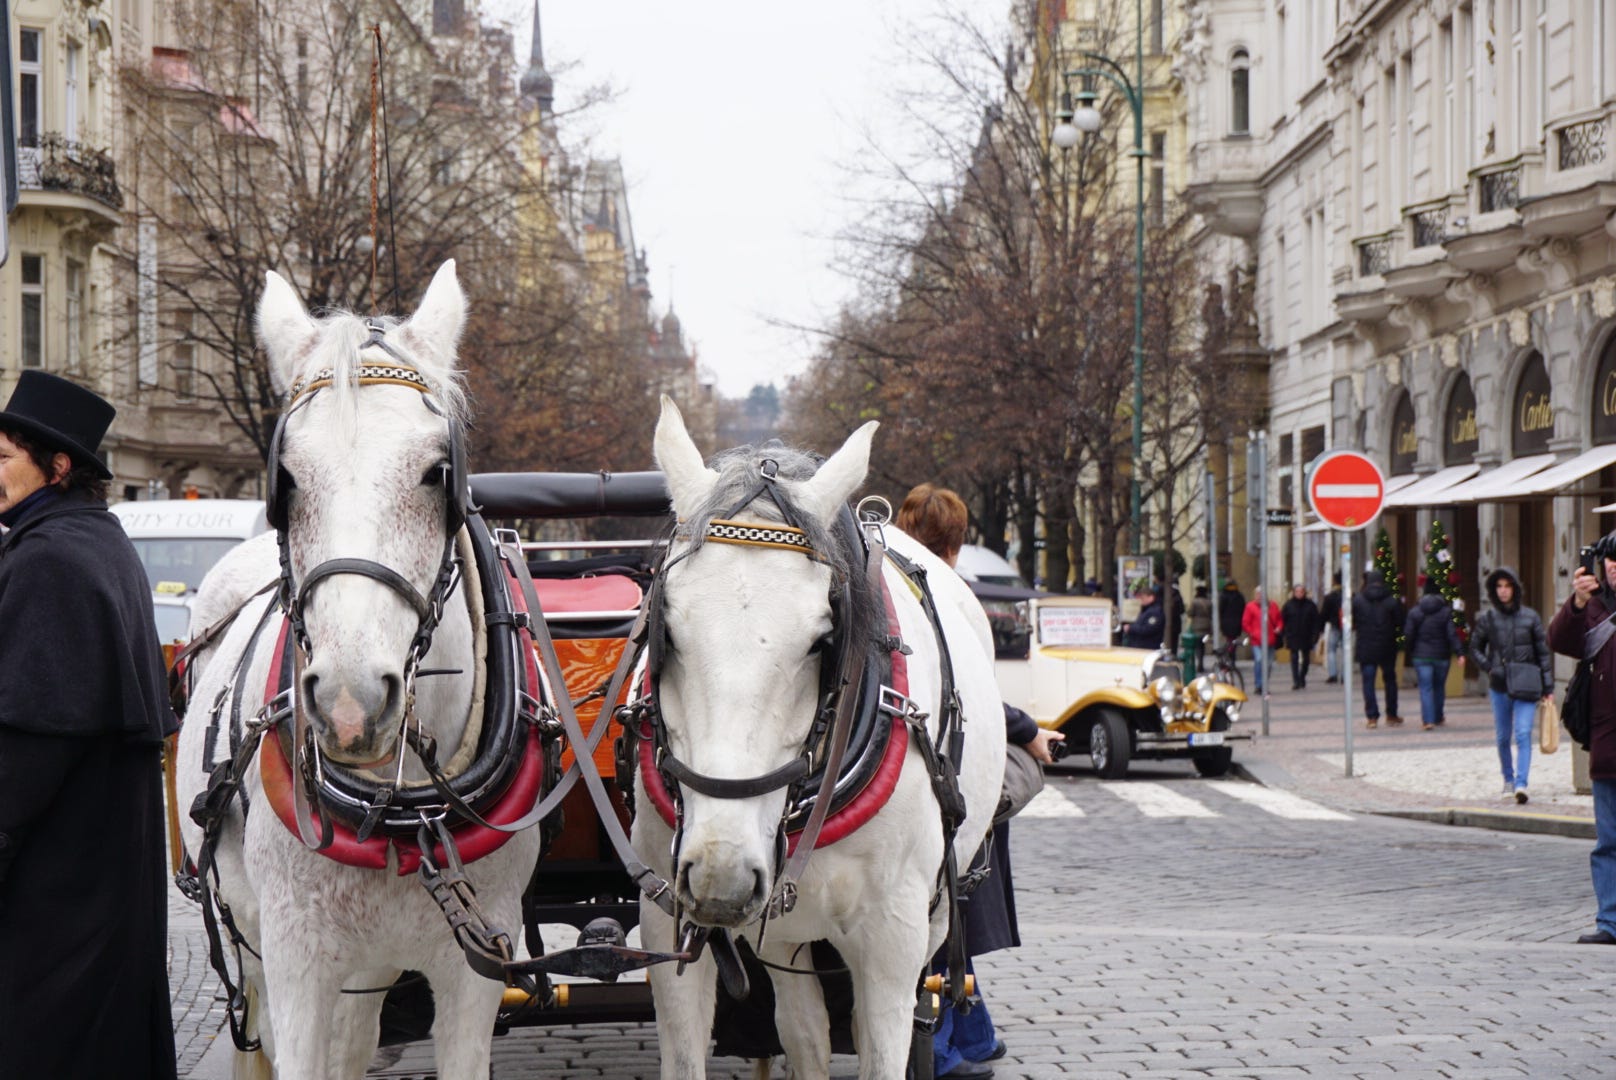 Horse carriages offering tourists a little bit of the old town nostalgia